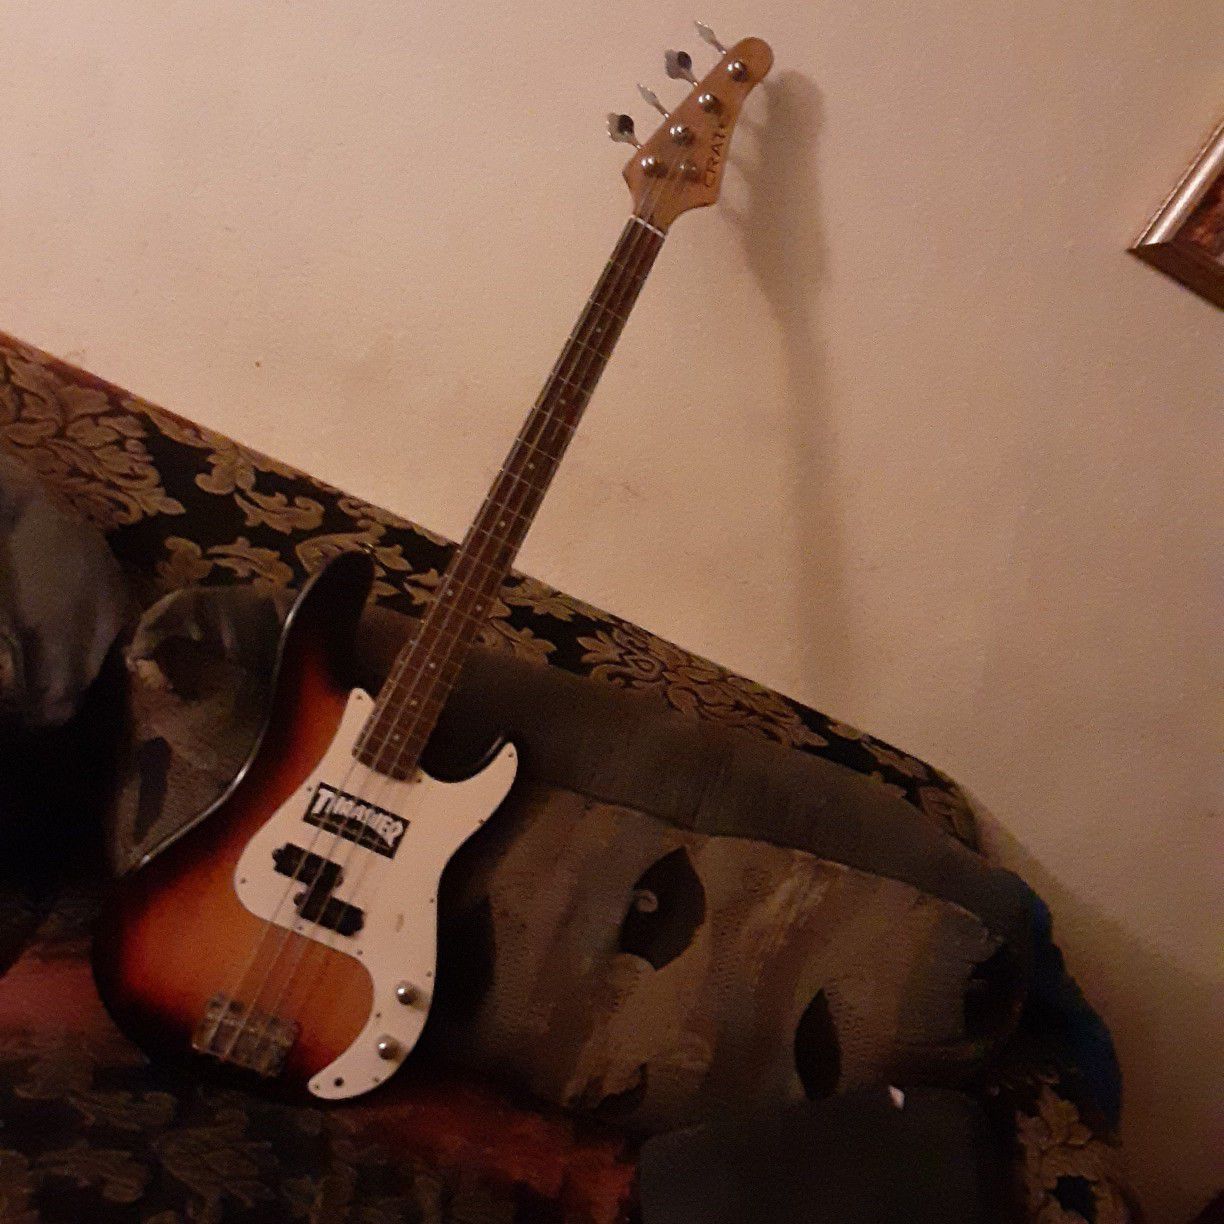 Crate Electric bass Guitar d string missing